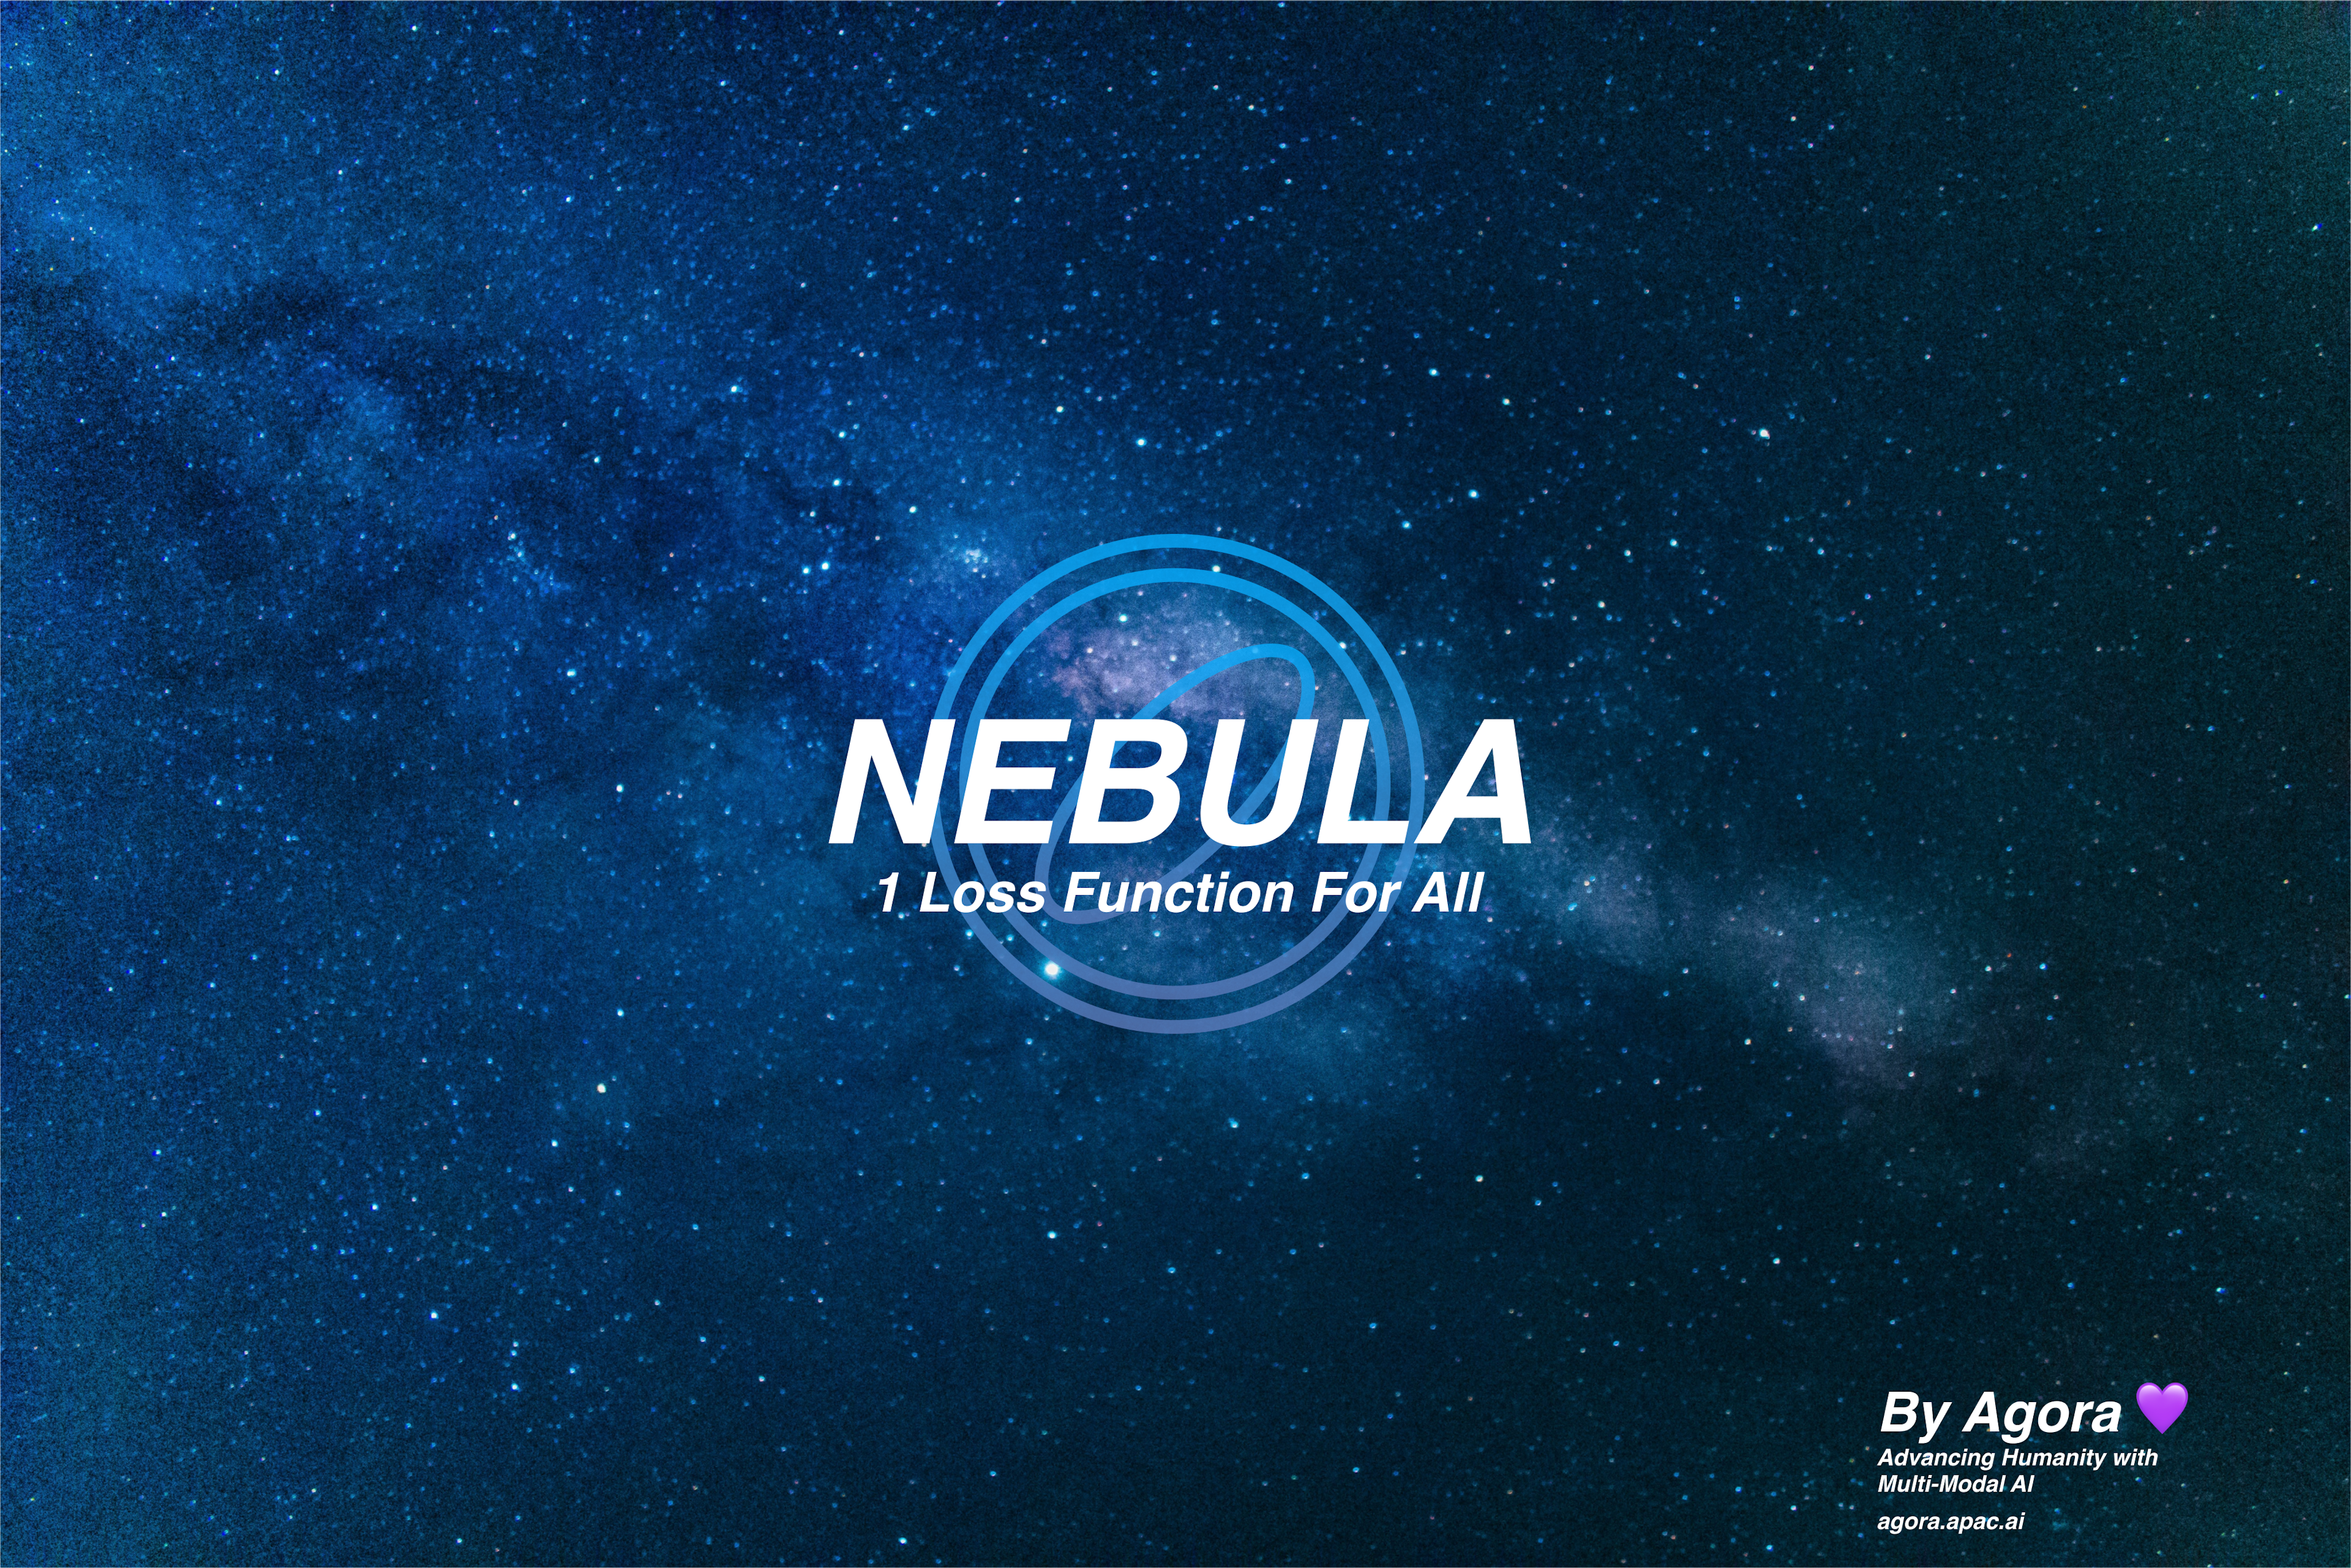 Nebula, the only loss function you need.